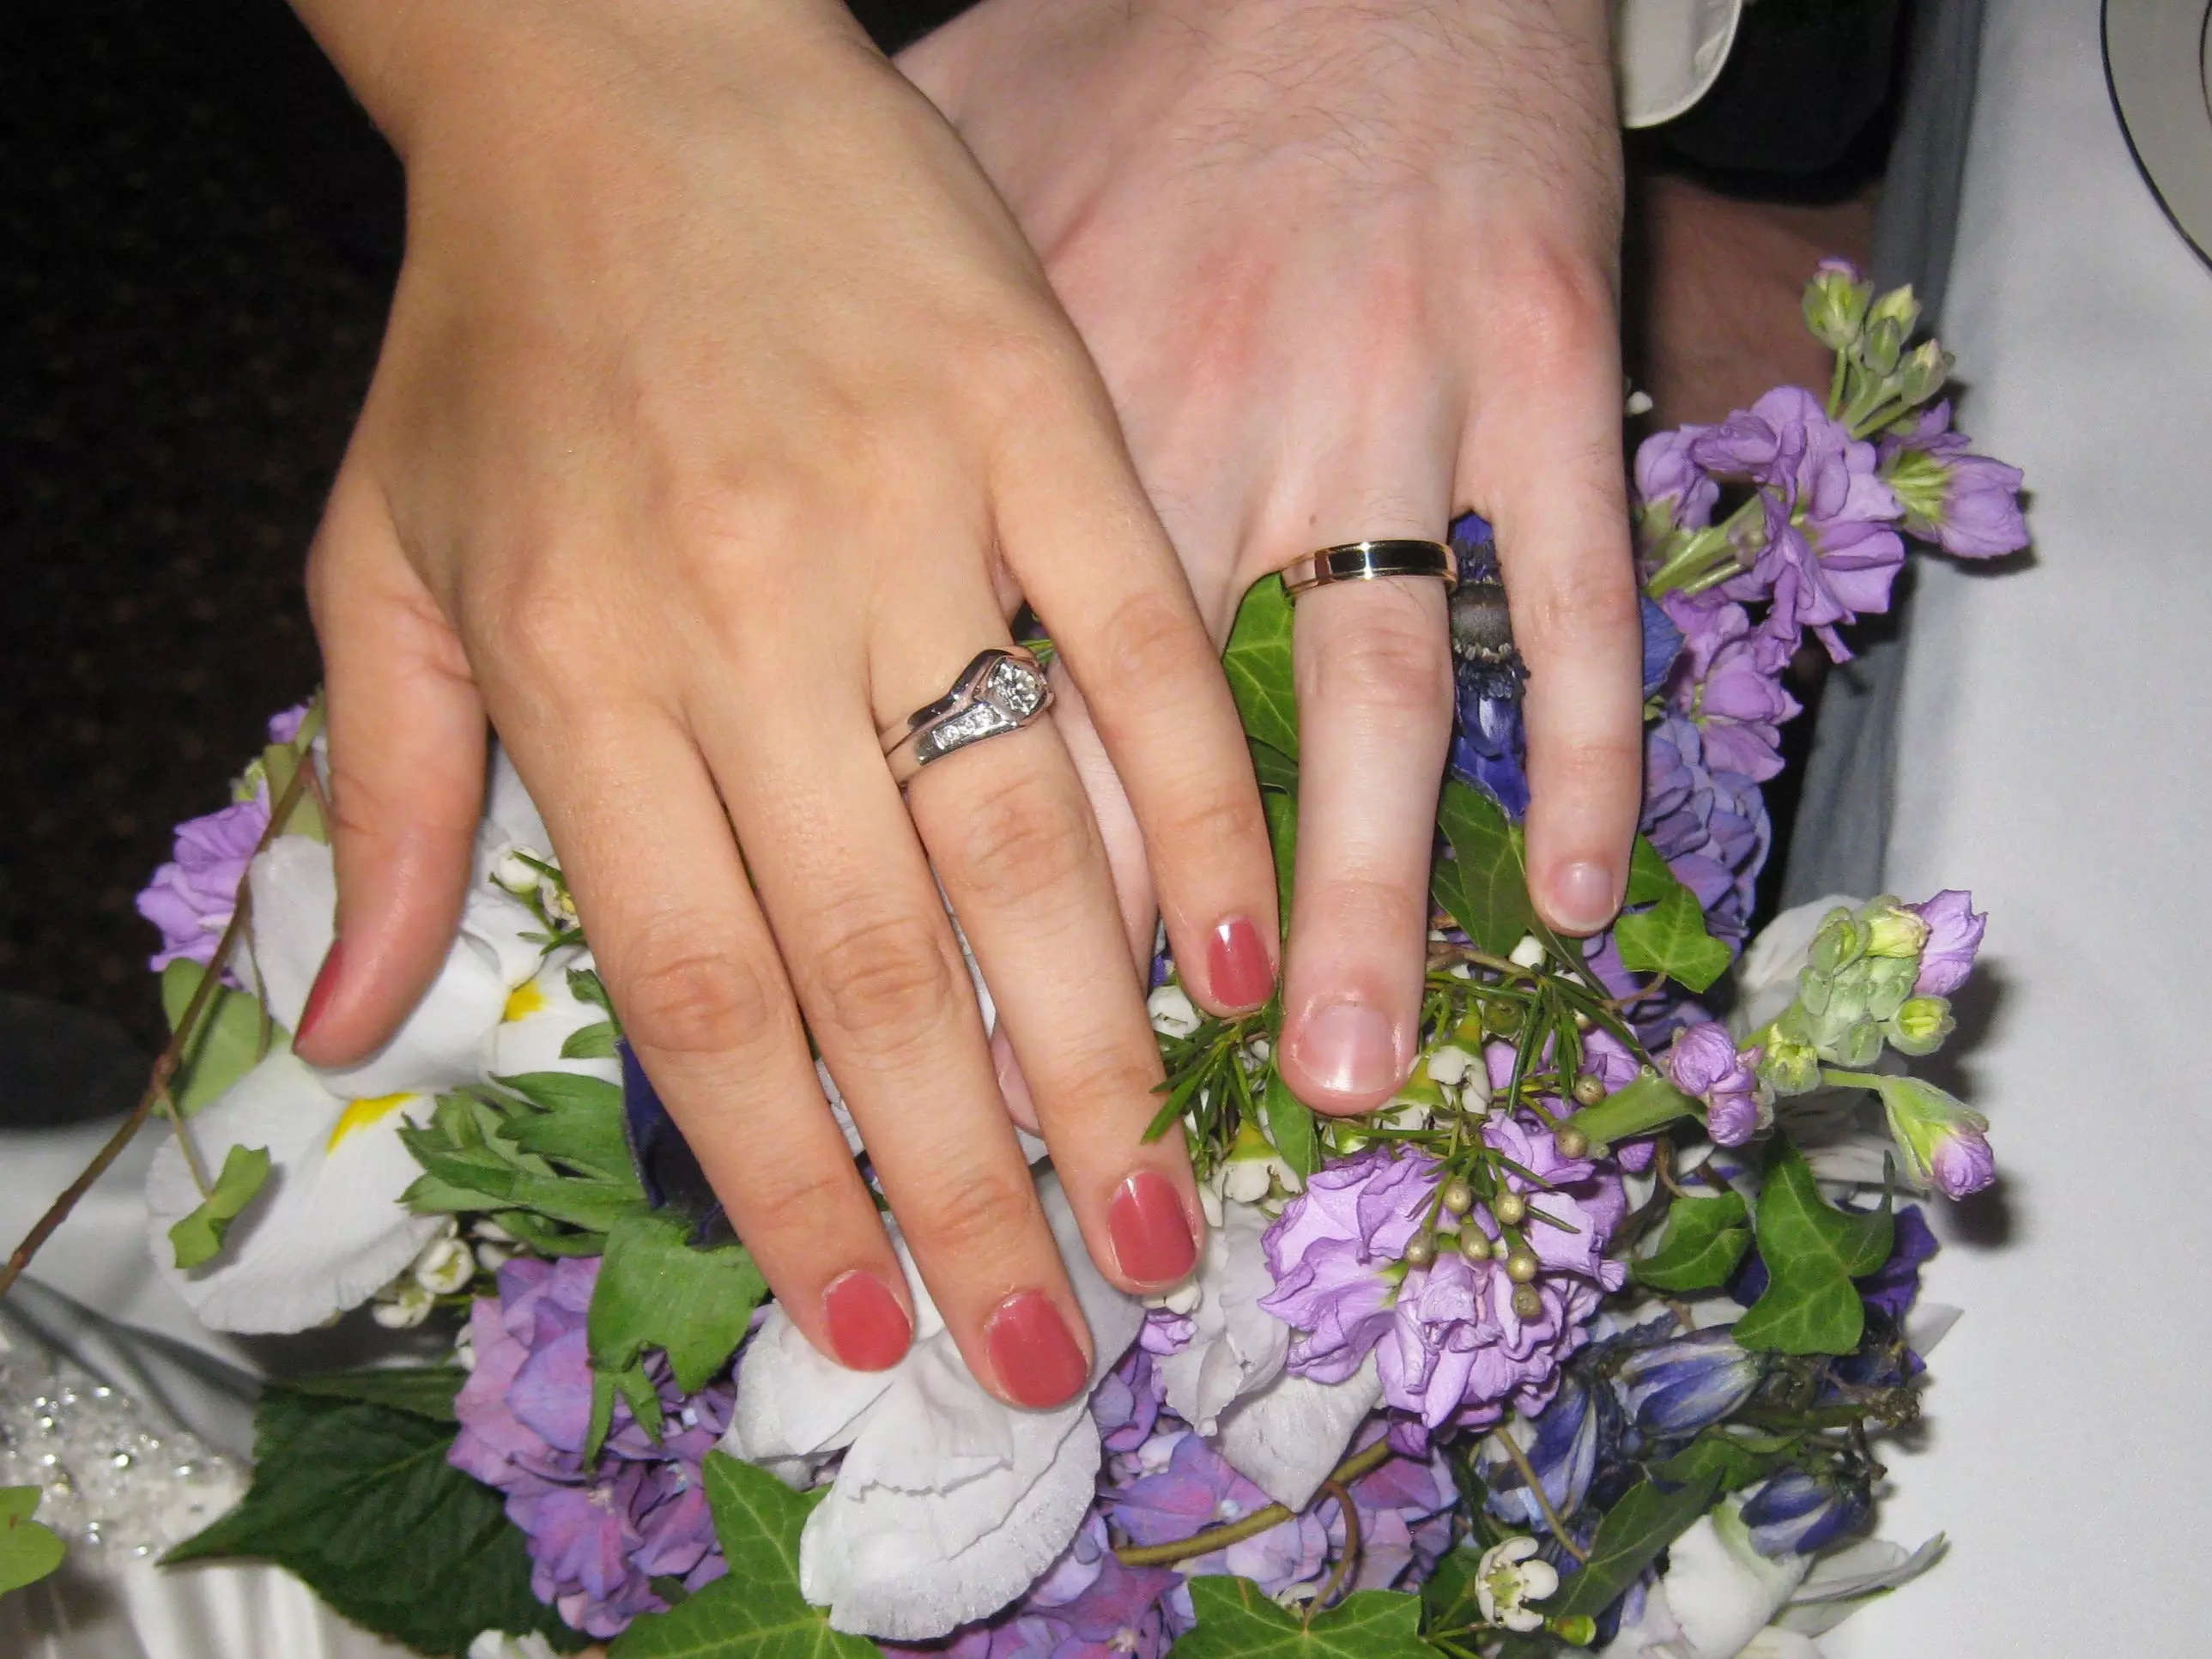 Stacy Brooks hand over a bouquet of flowers with her wedding ring, and her husband